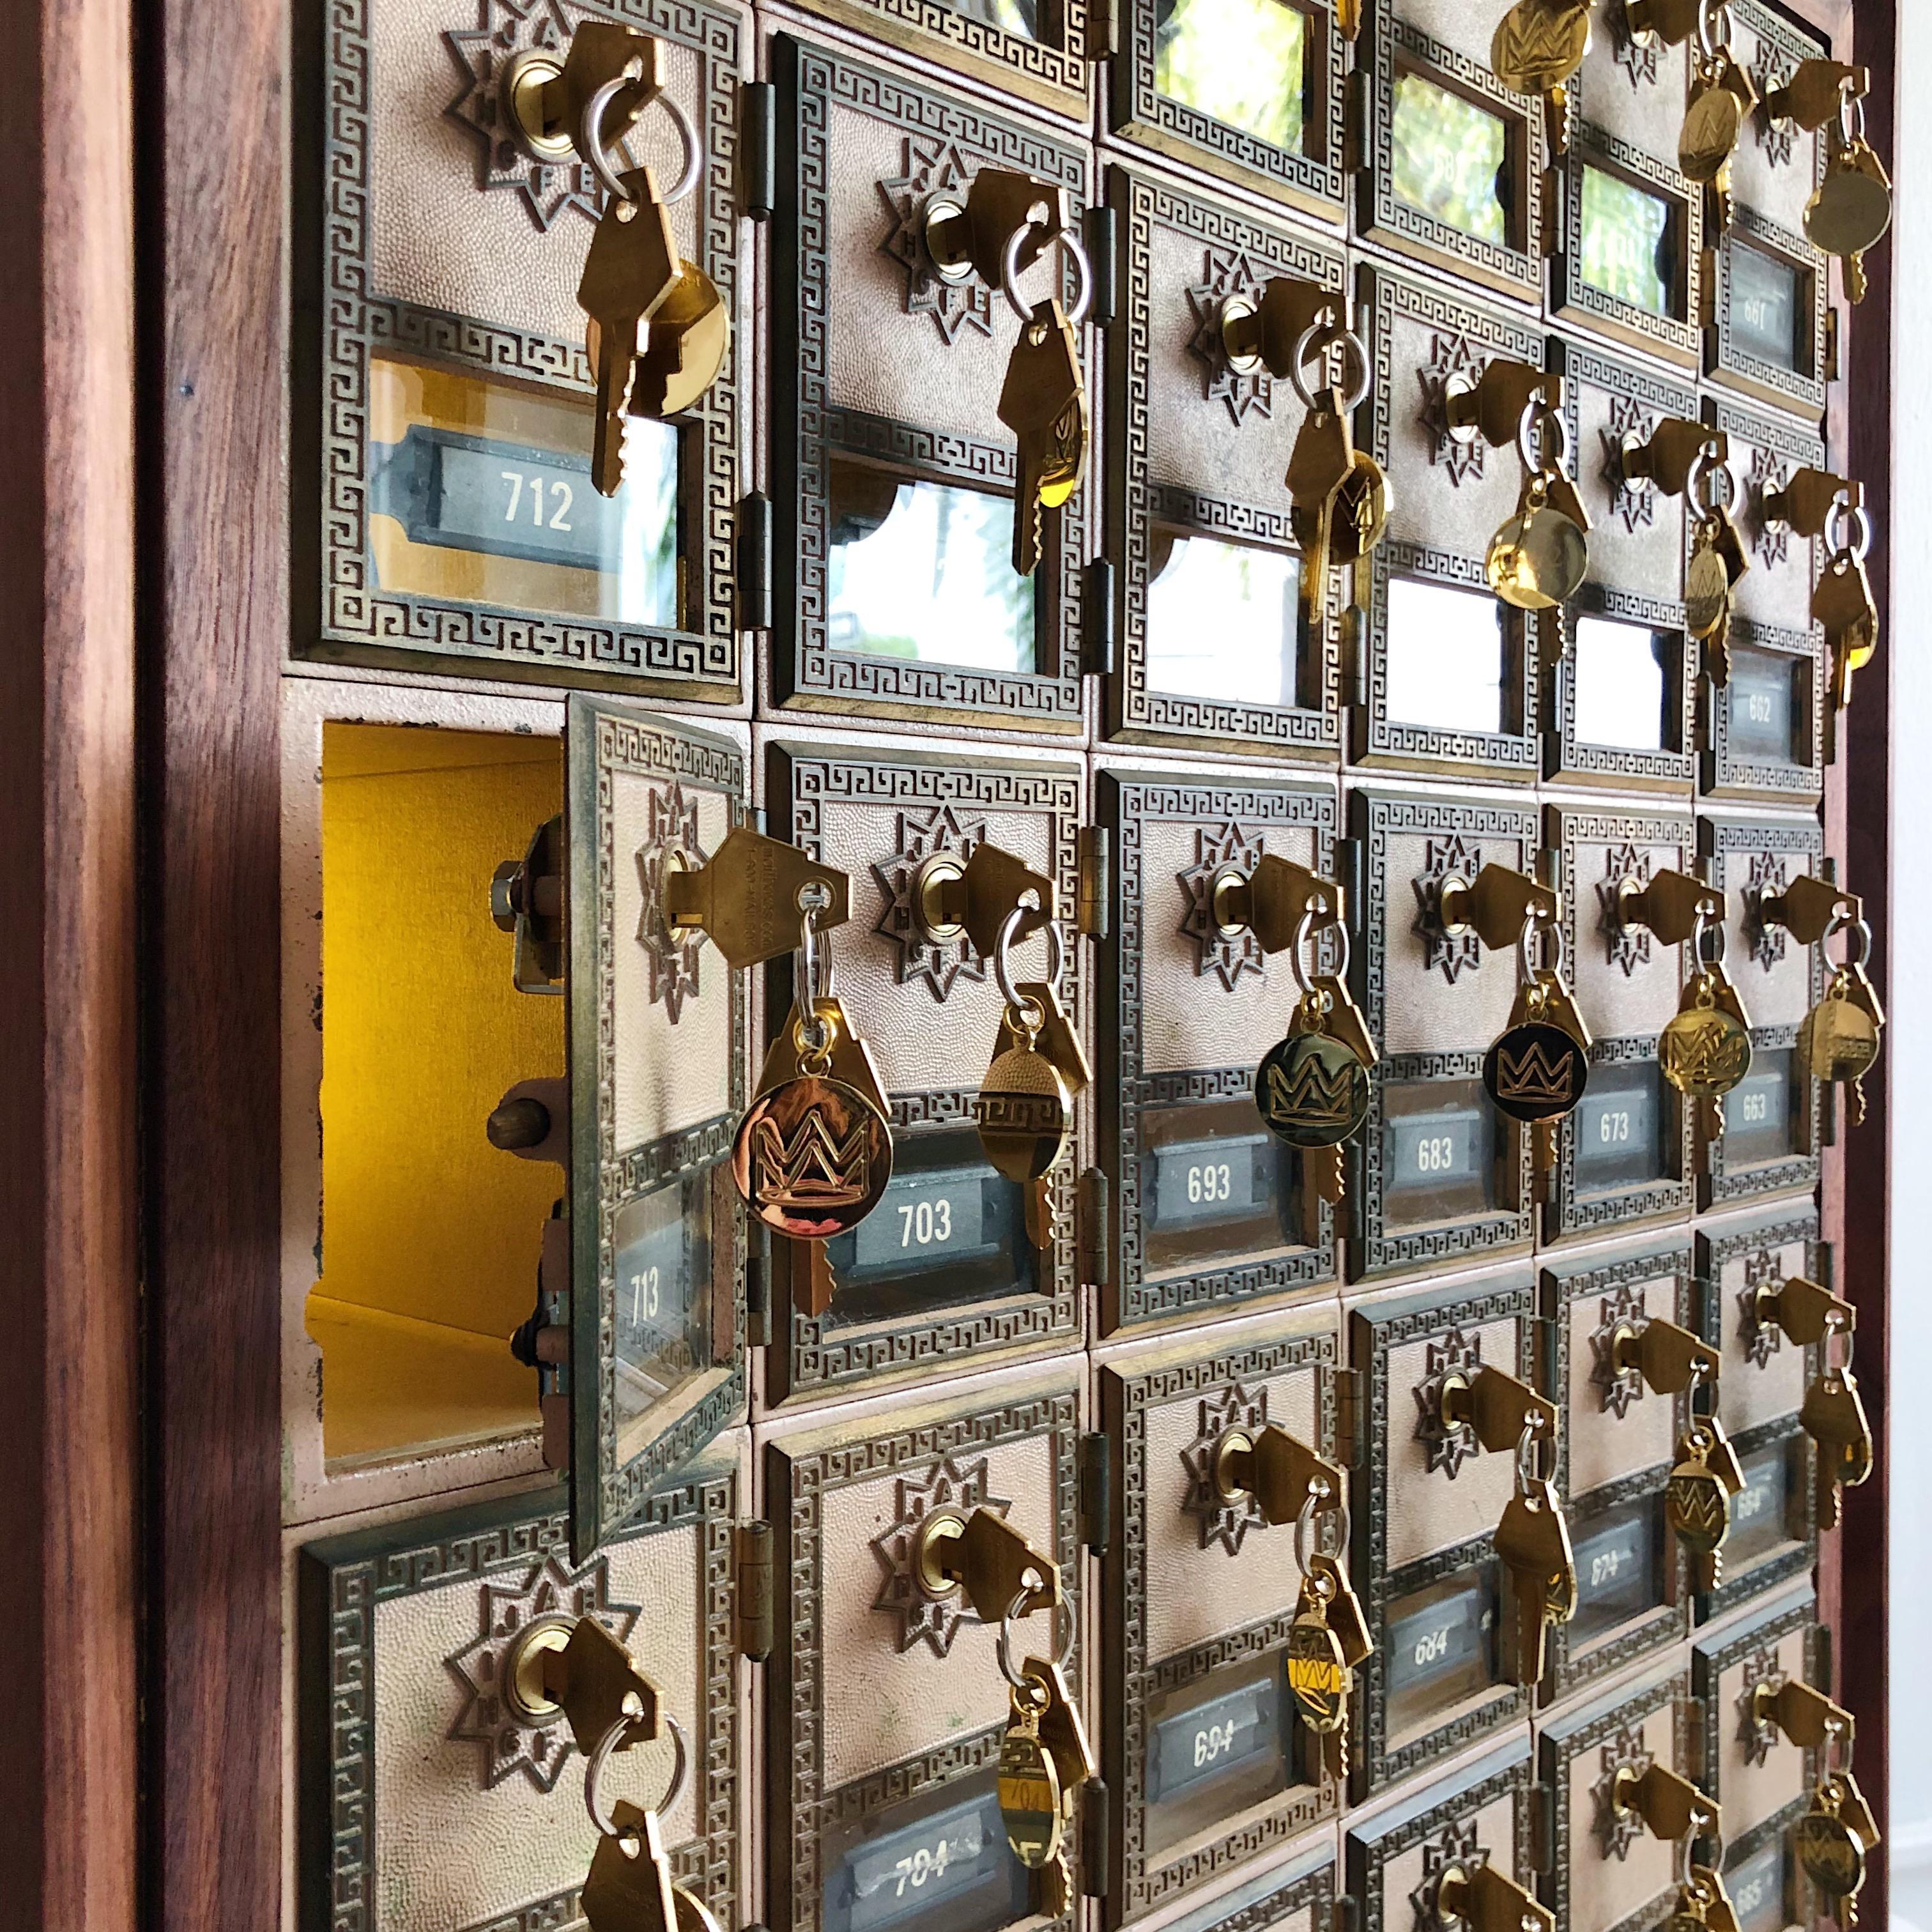 The Costner collection from Wigu Studios is dedicated to the artist's father who worked as a postman. This is the last of a small limited edition of 25, design made from thirty 1945-1975 vintage Post Office mailboxes with brass-stamped keys and